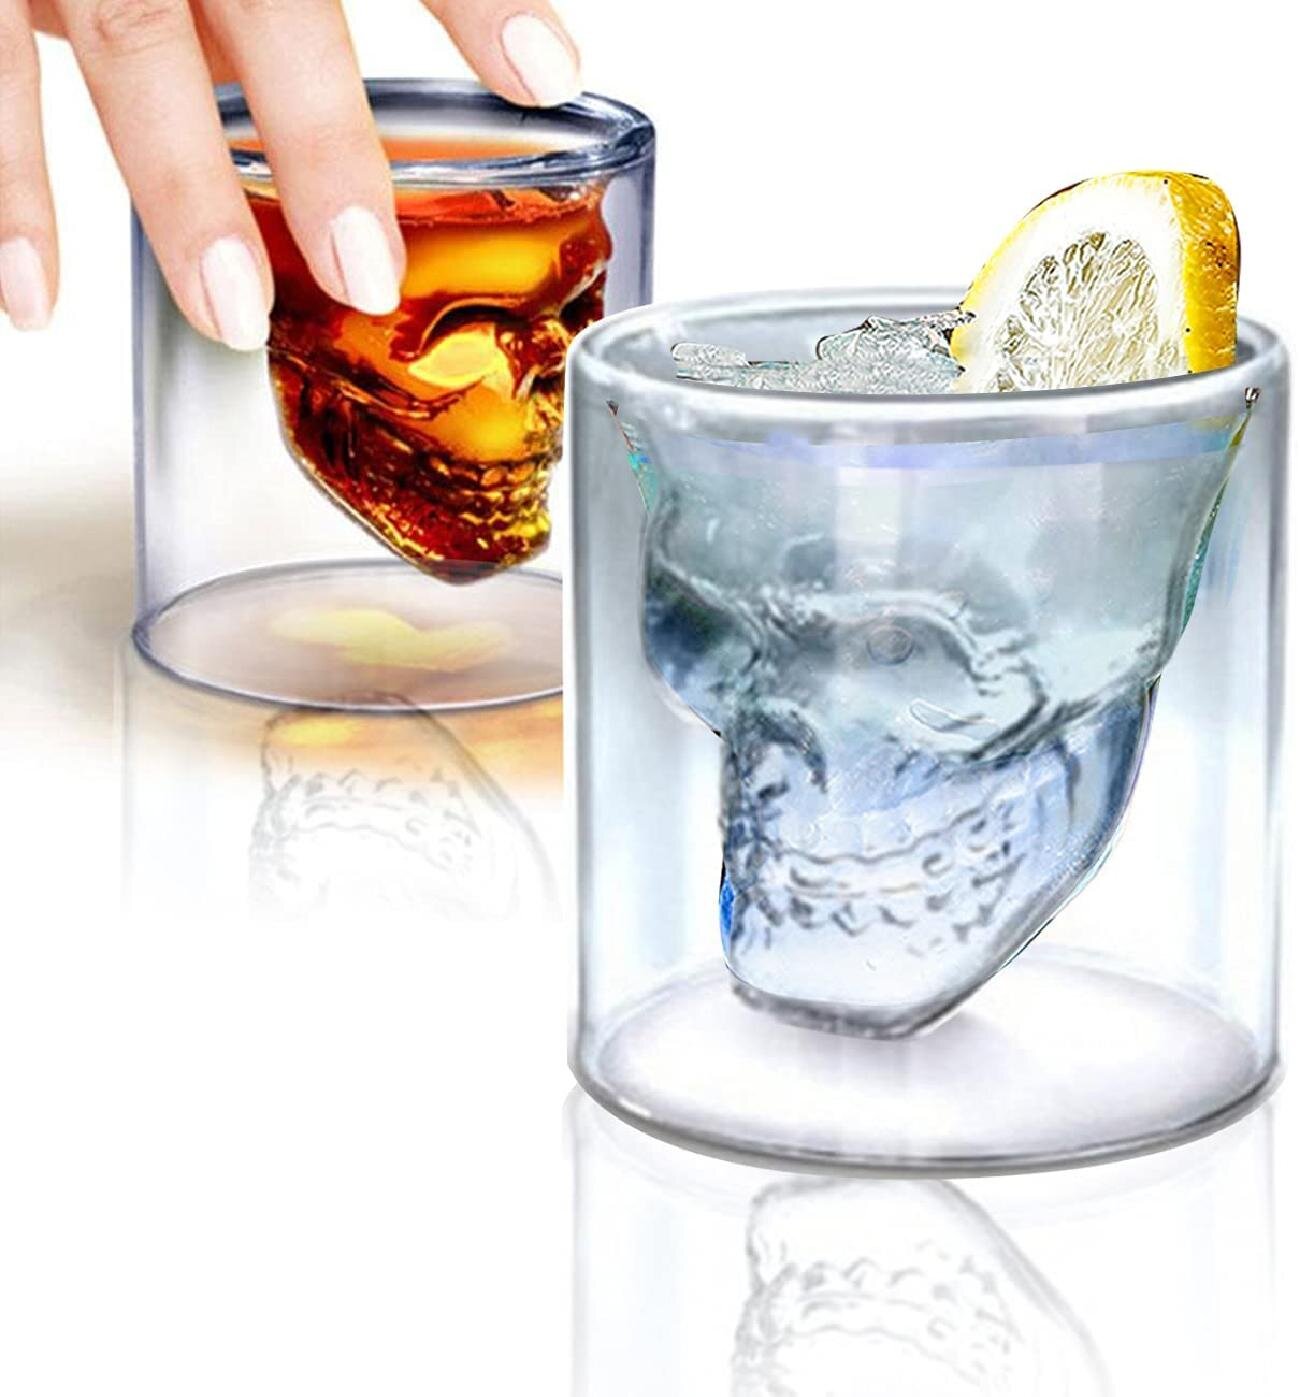 3D Skull Glass Mug,Funny Double Walled Crystal Heat-Resistant Beer Glasses for Wine Cocktail Vodka Tequila,Halloween Party Bar Gift,Setof4 Set of 4 Multi-Sized